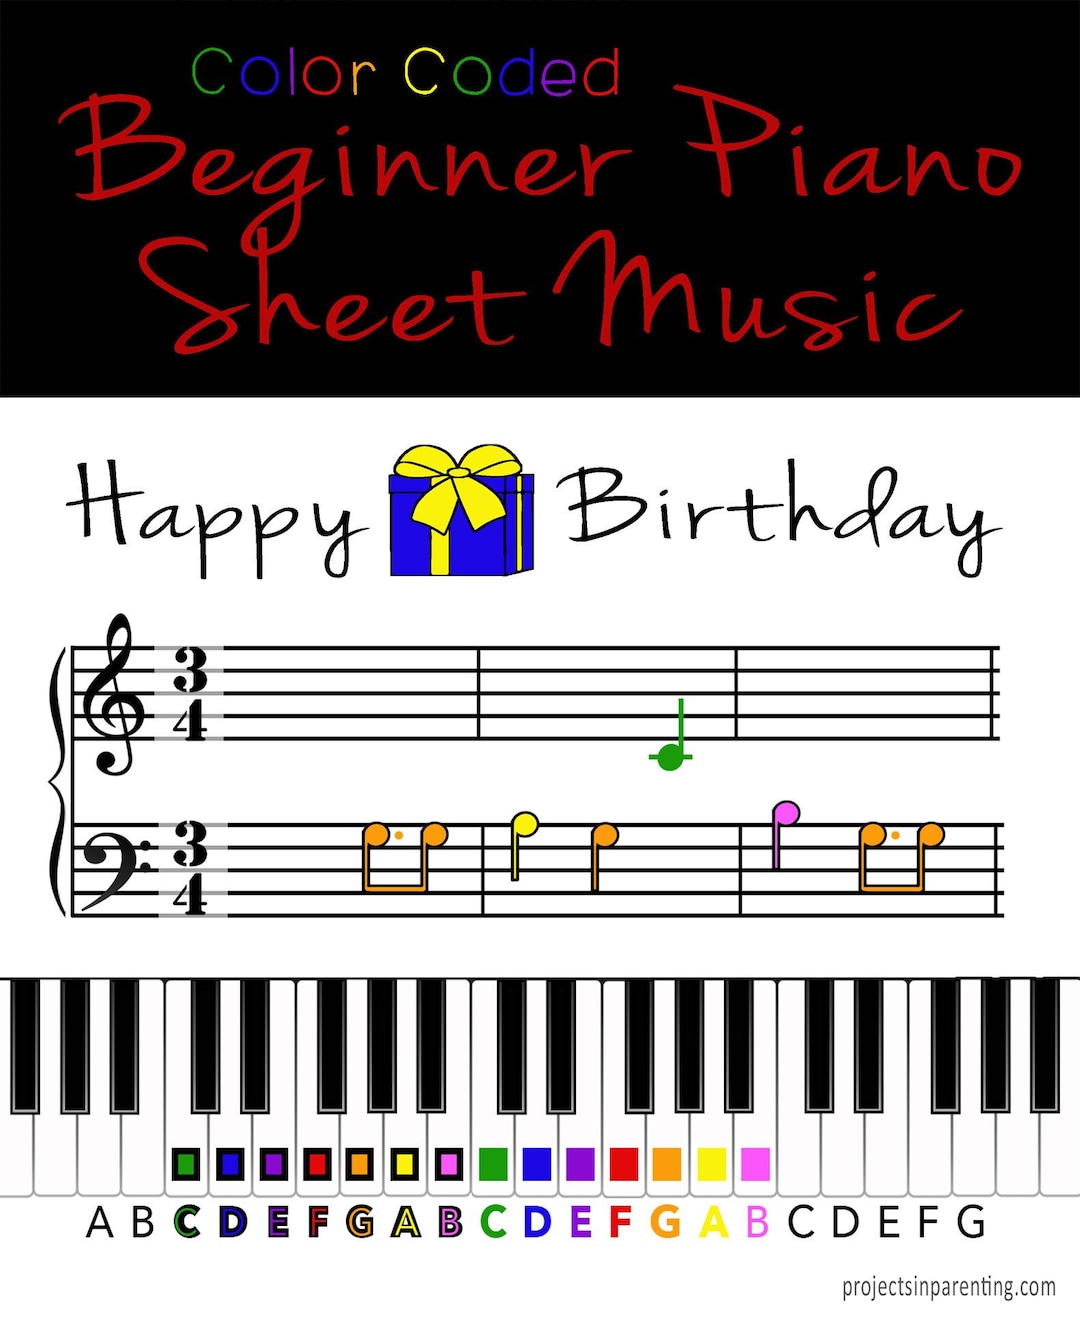 Happy birthday color coded beginner piano music sheet instant download